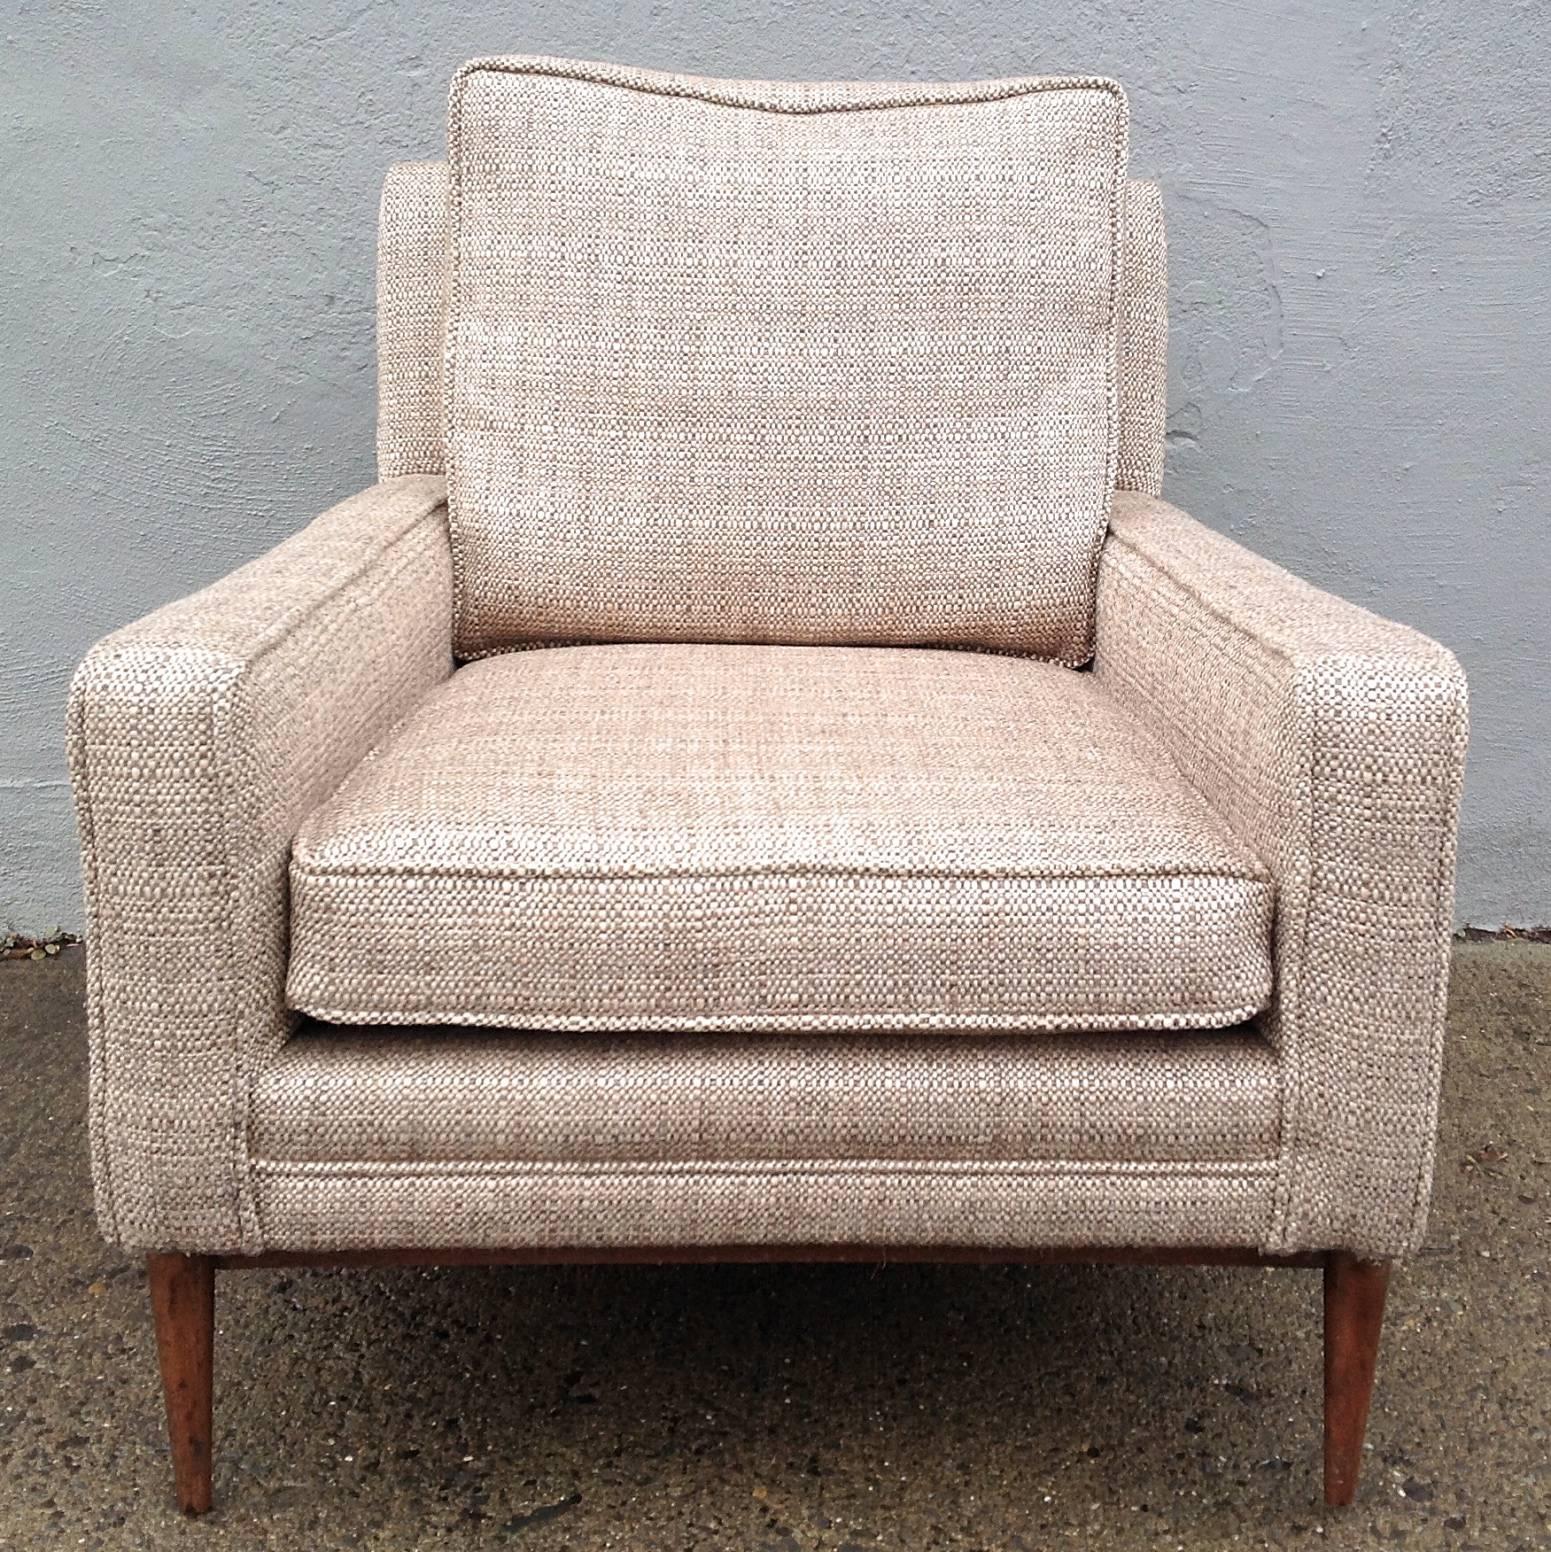 Model 1323 lounge chair by Paul McCobb for Directional. New upholstery with down loose back cushion. 35